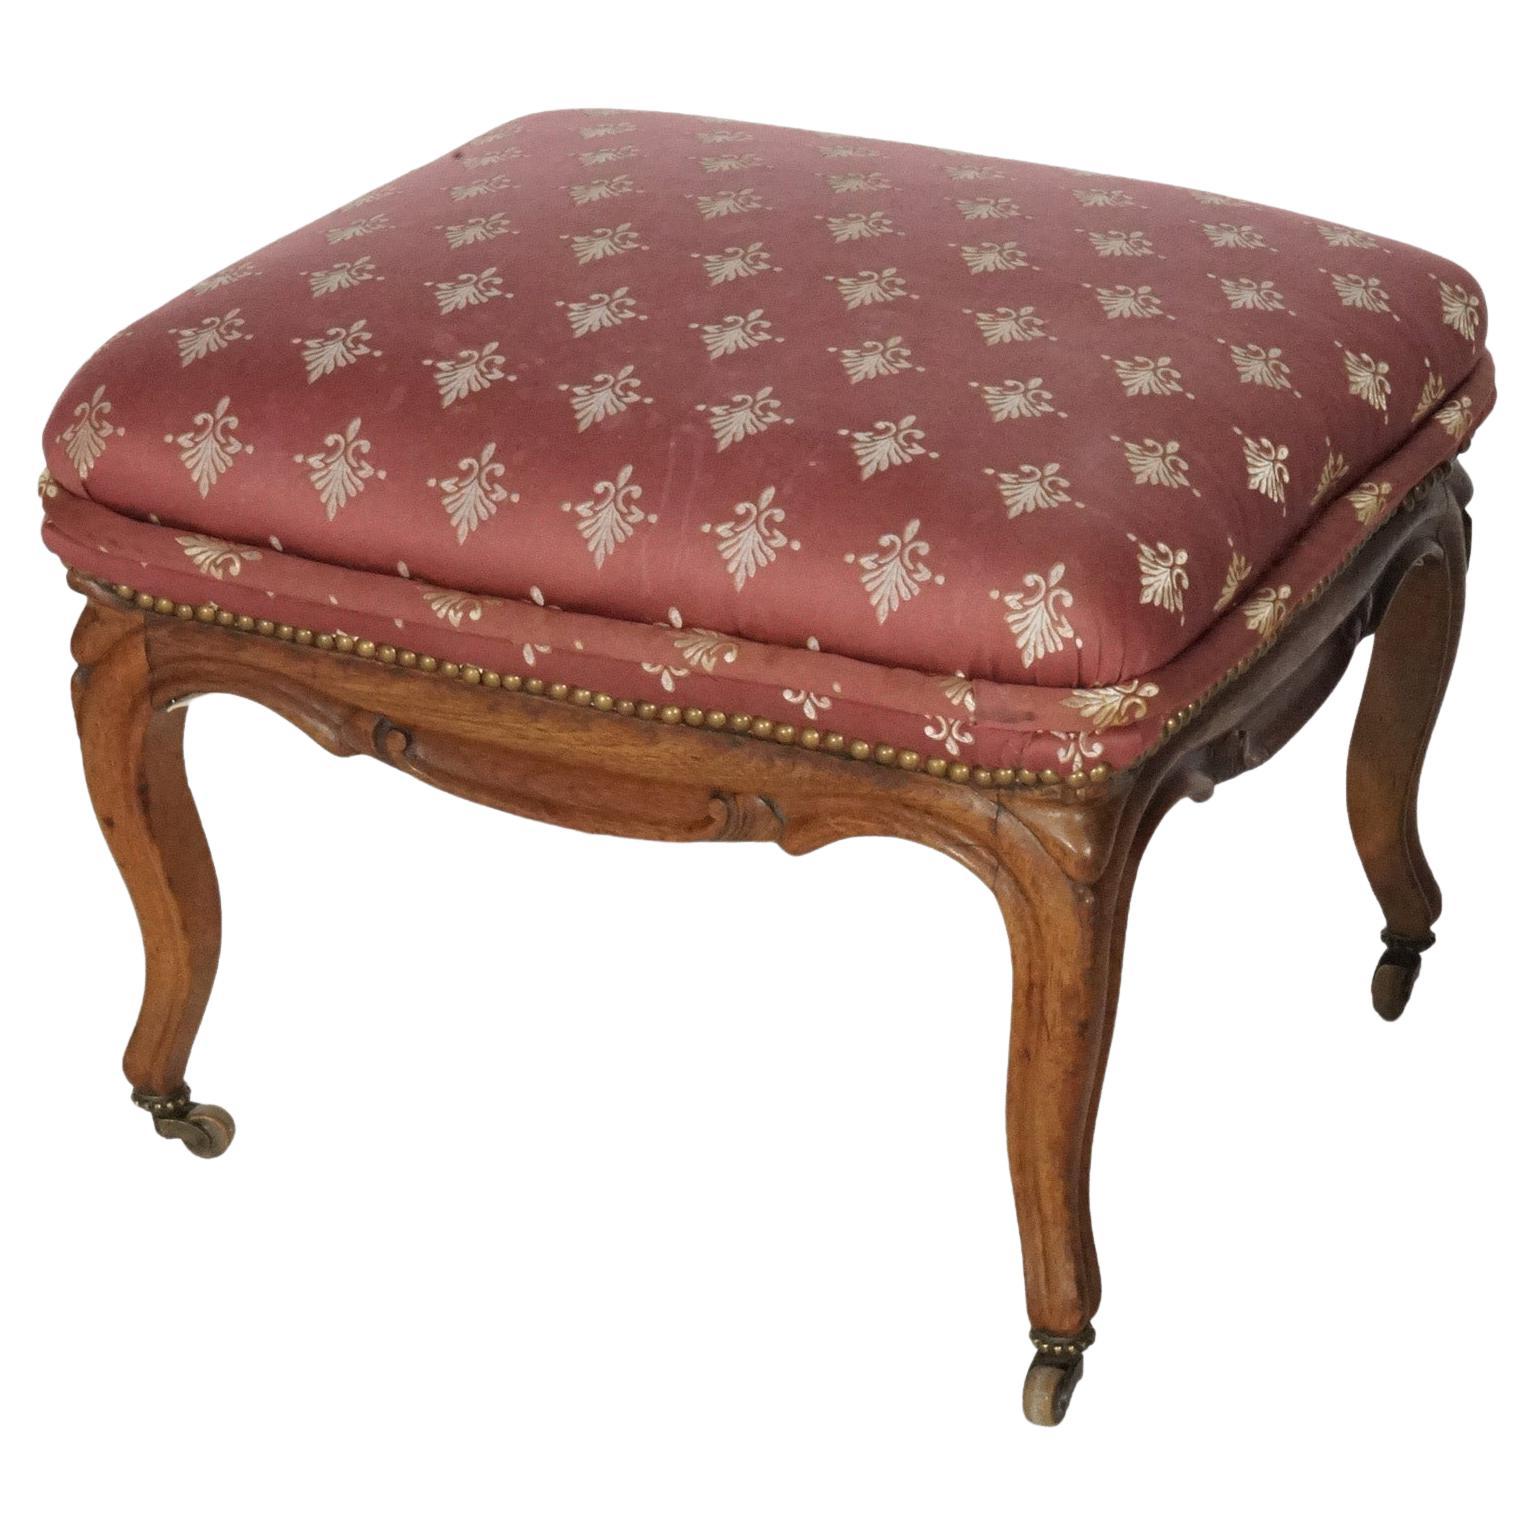 Antique French Style Carved Walnut & Upholstered Foot Stool, circa 1920 For Sale